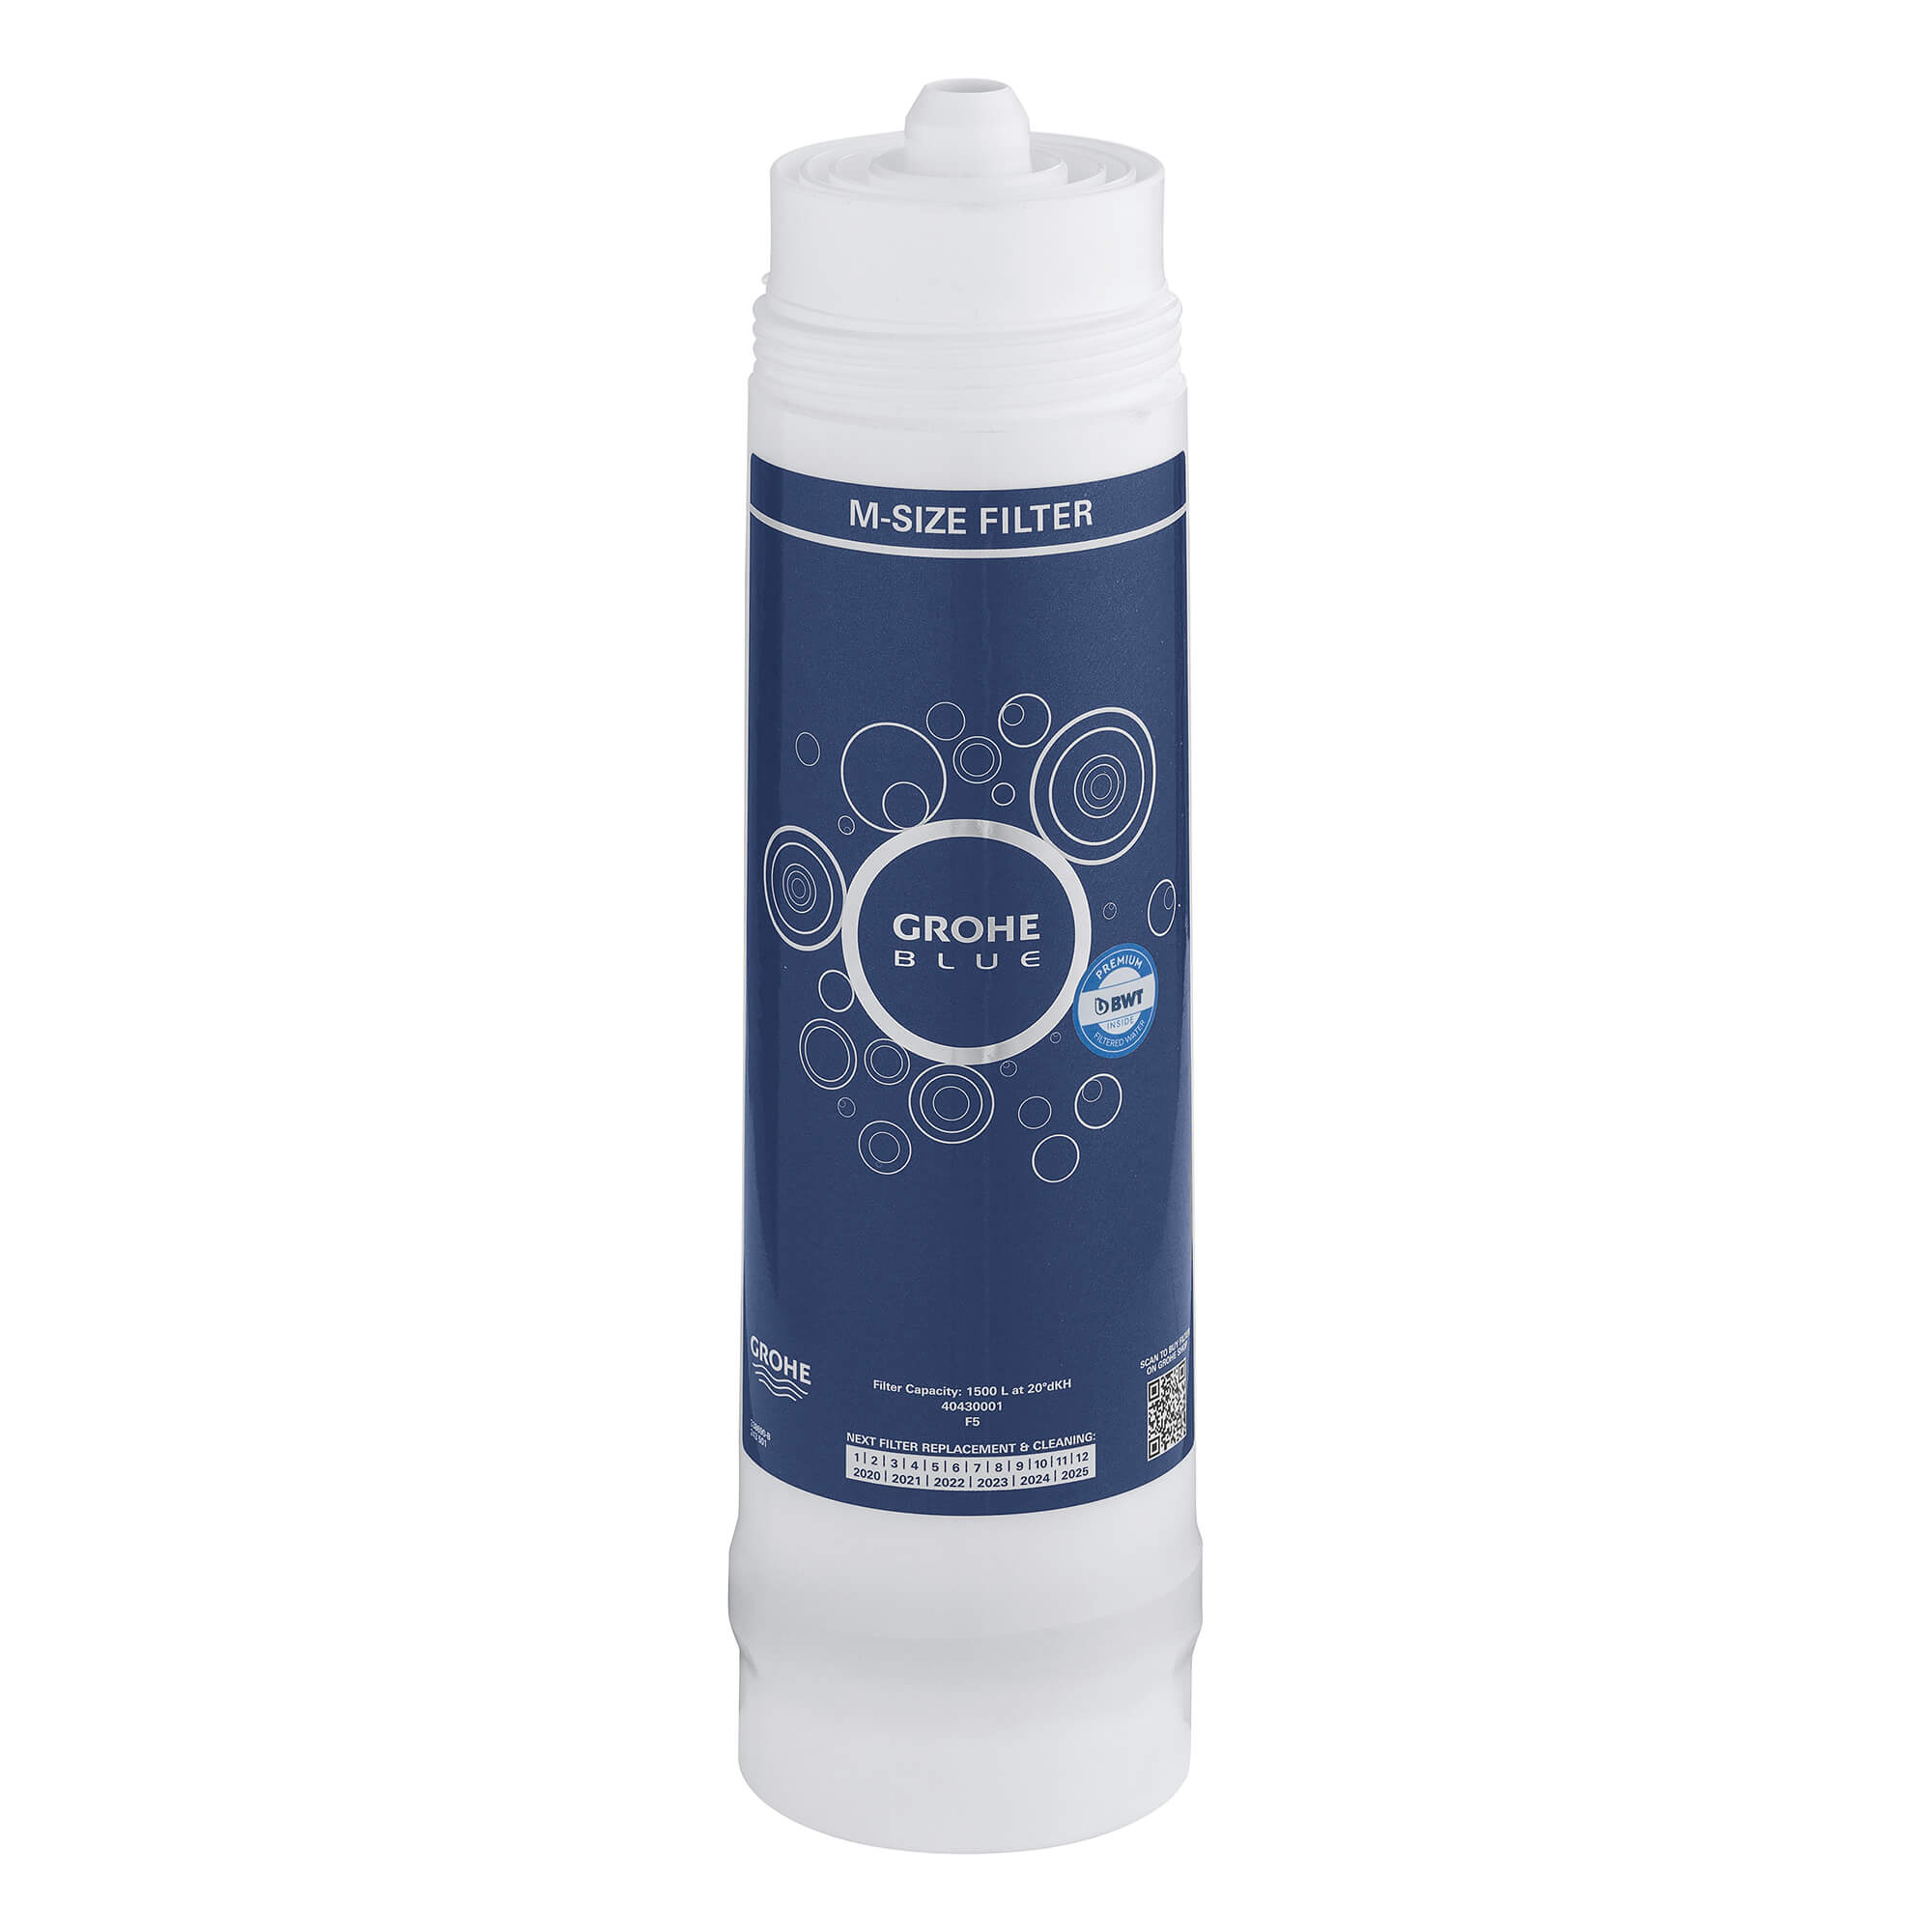 labyrint radicaal Standaard GROHE Blue® Carbon Filter, M-Size